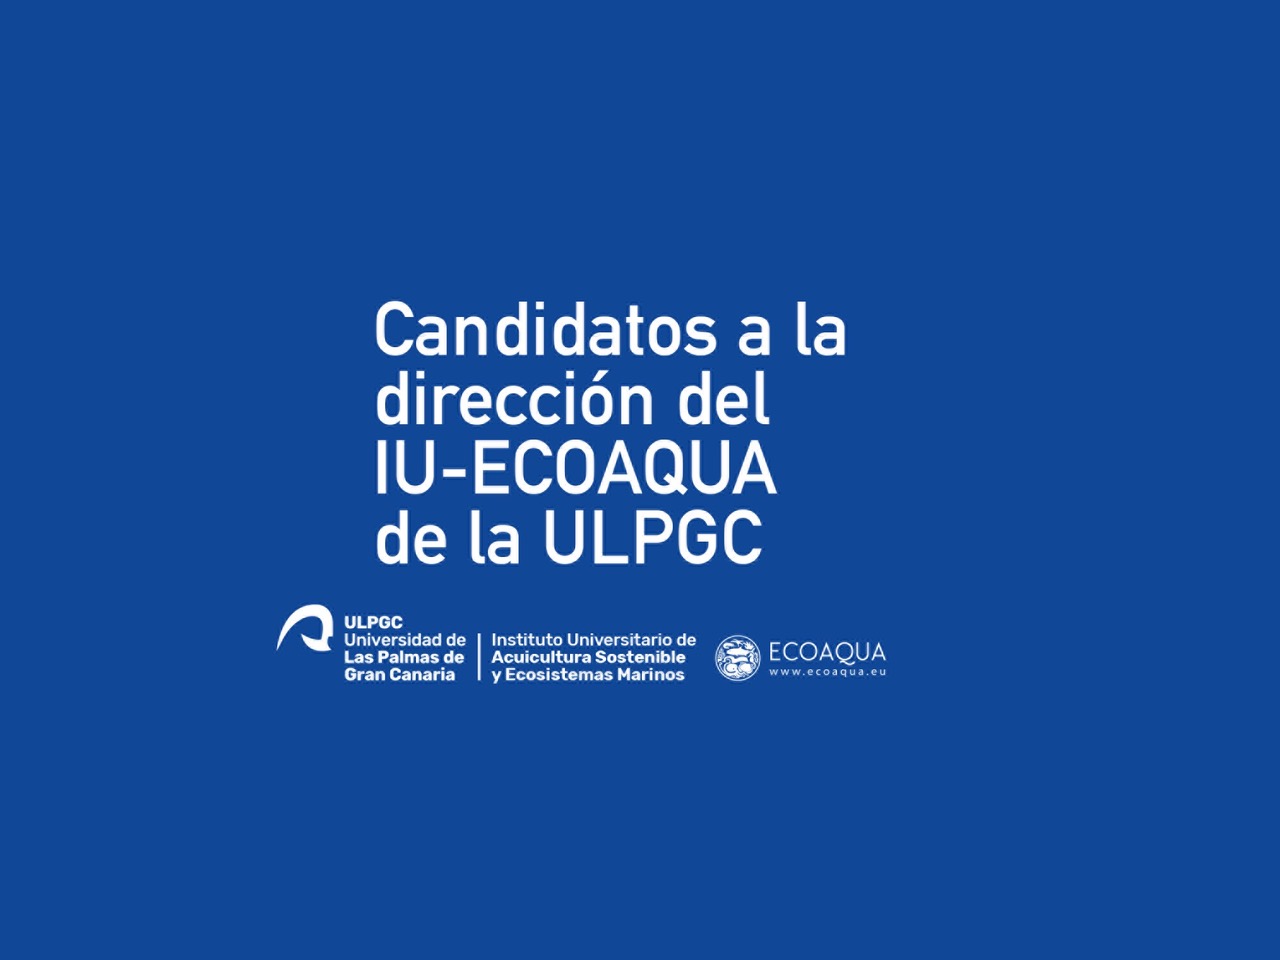 Provisional Proclamation of Candidates for Director of the IU-ECOAQUA